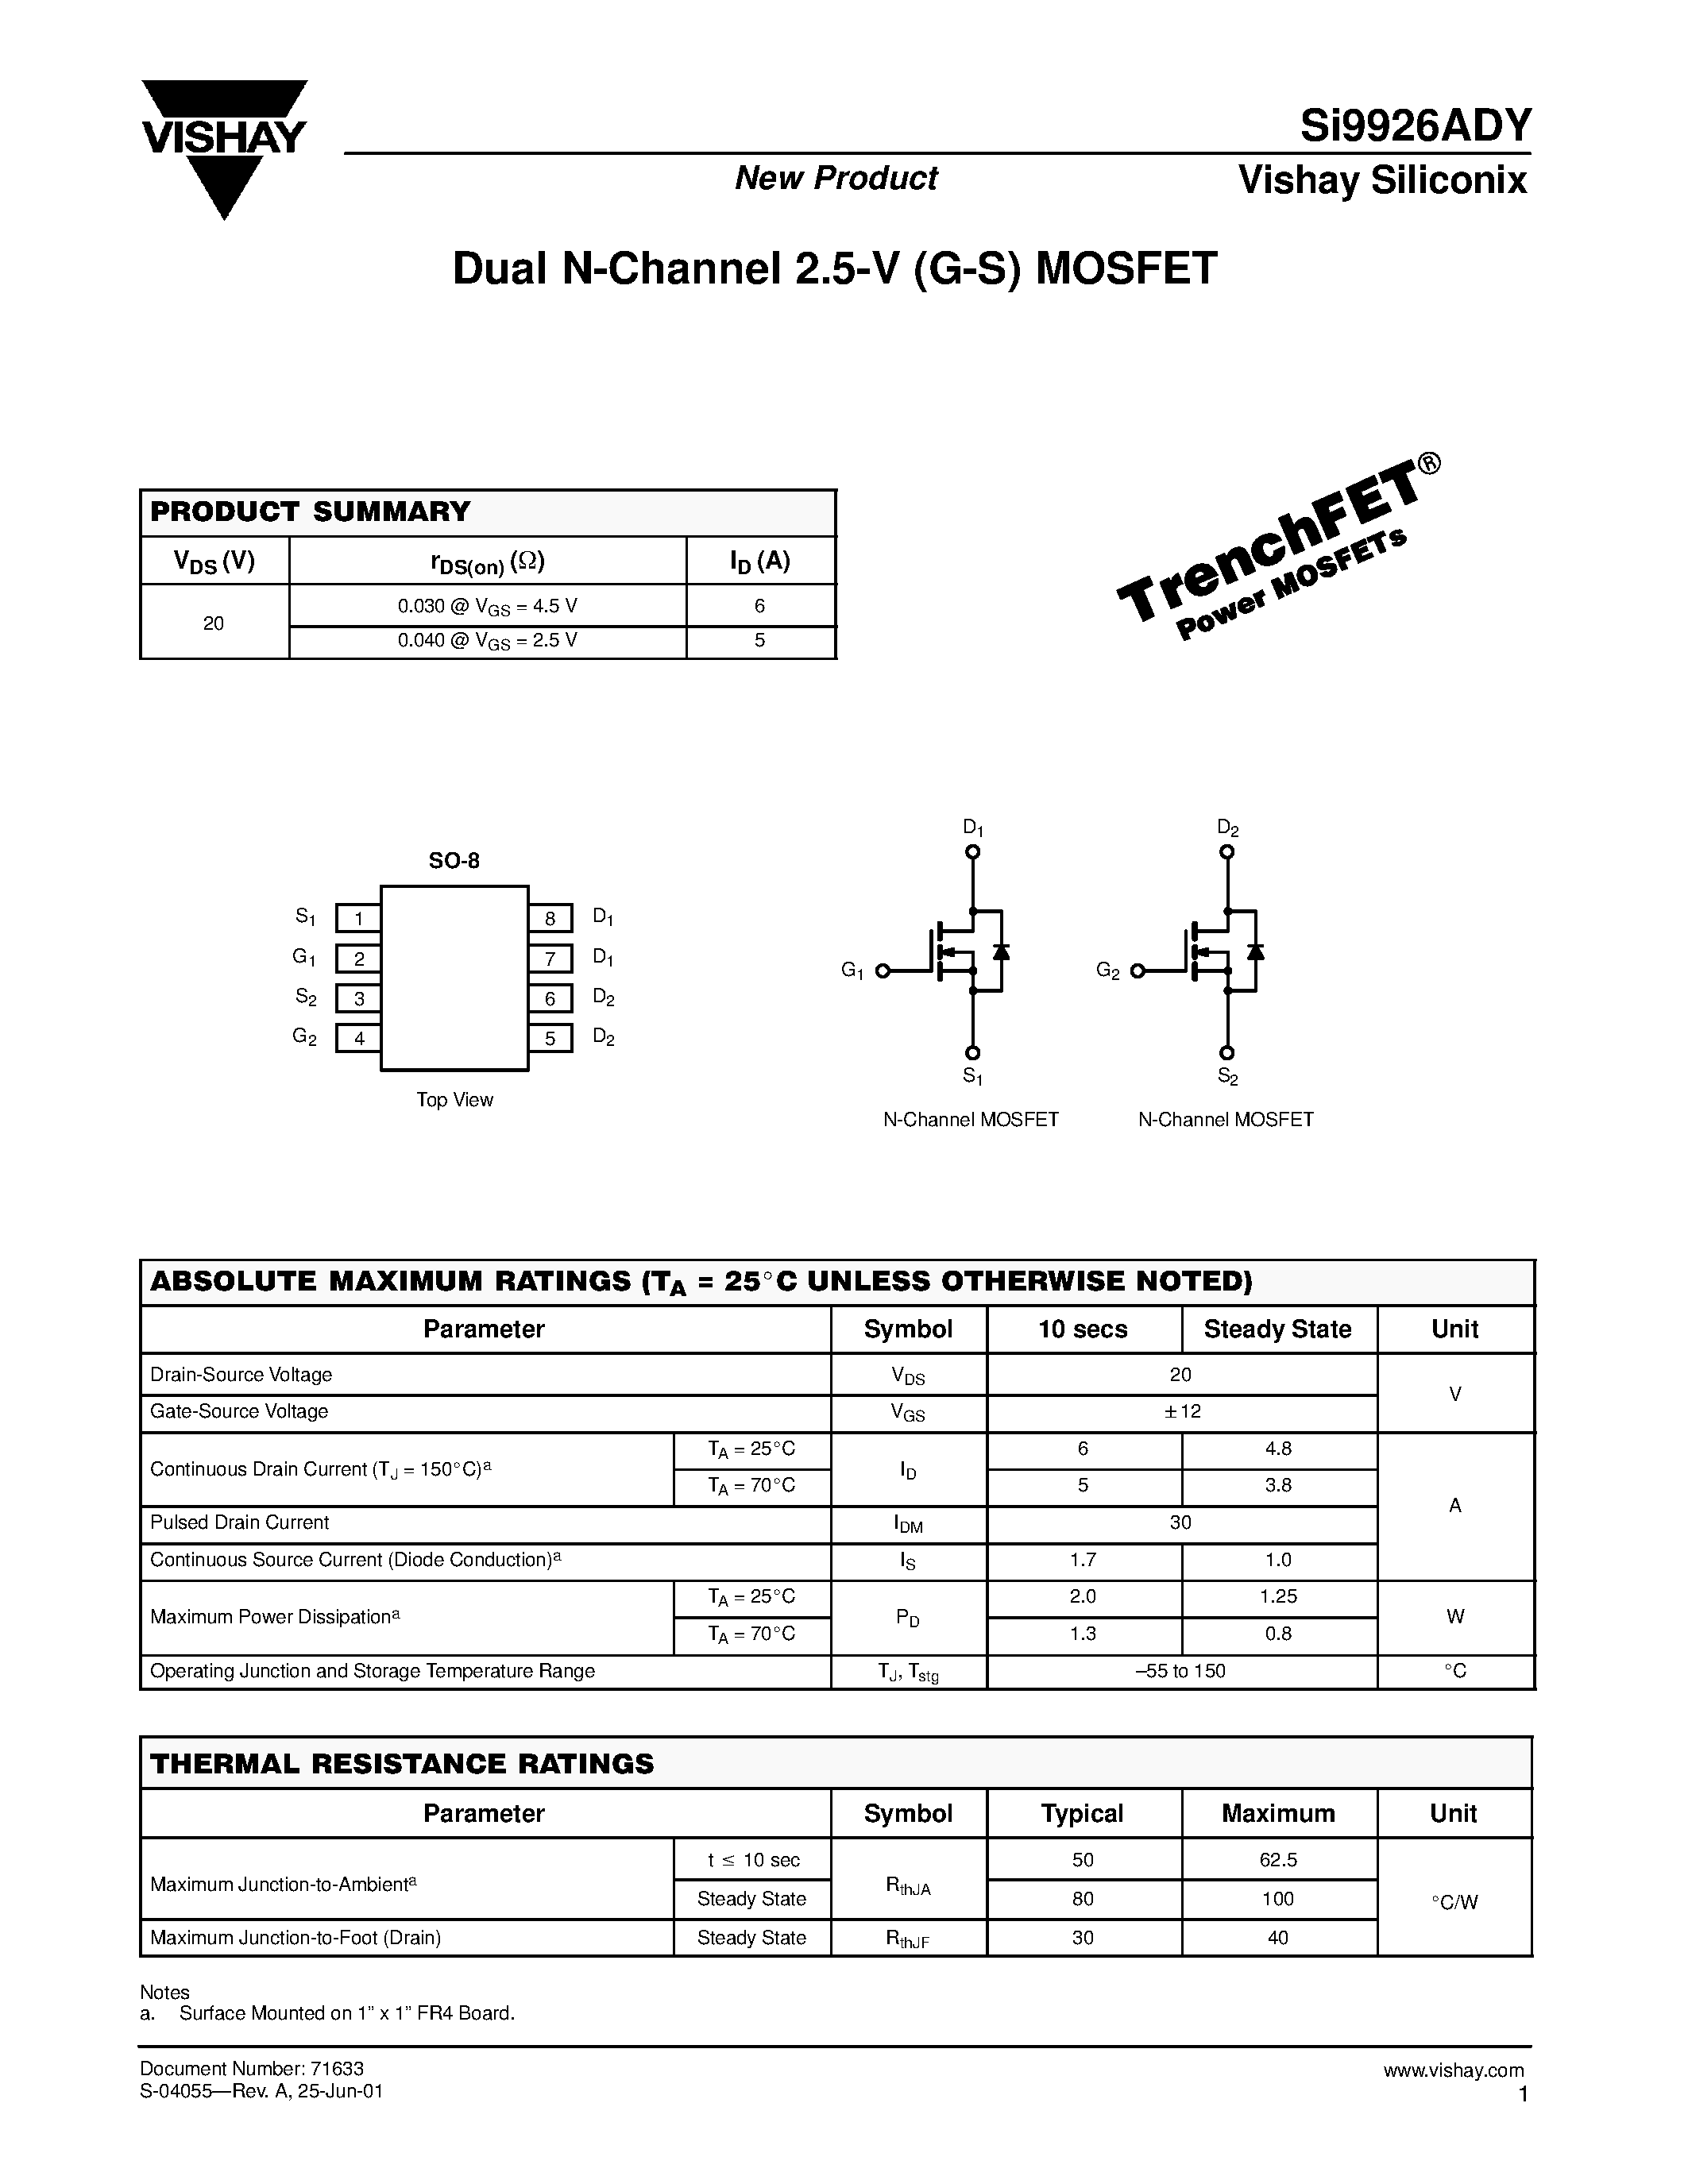 Datasheet SI9926ADY - Dual N-Channel 2.5-V (G-S) MOSFET page 1